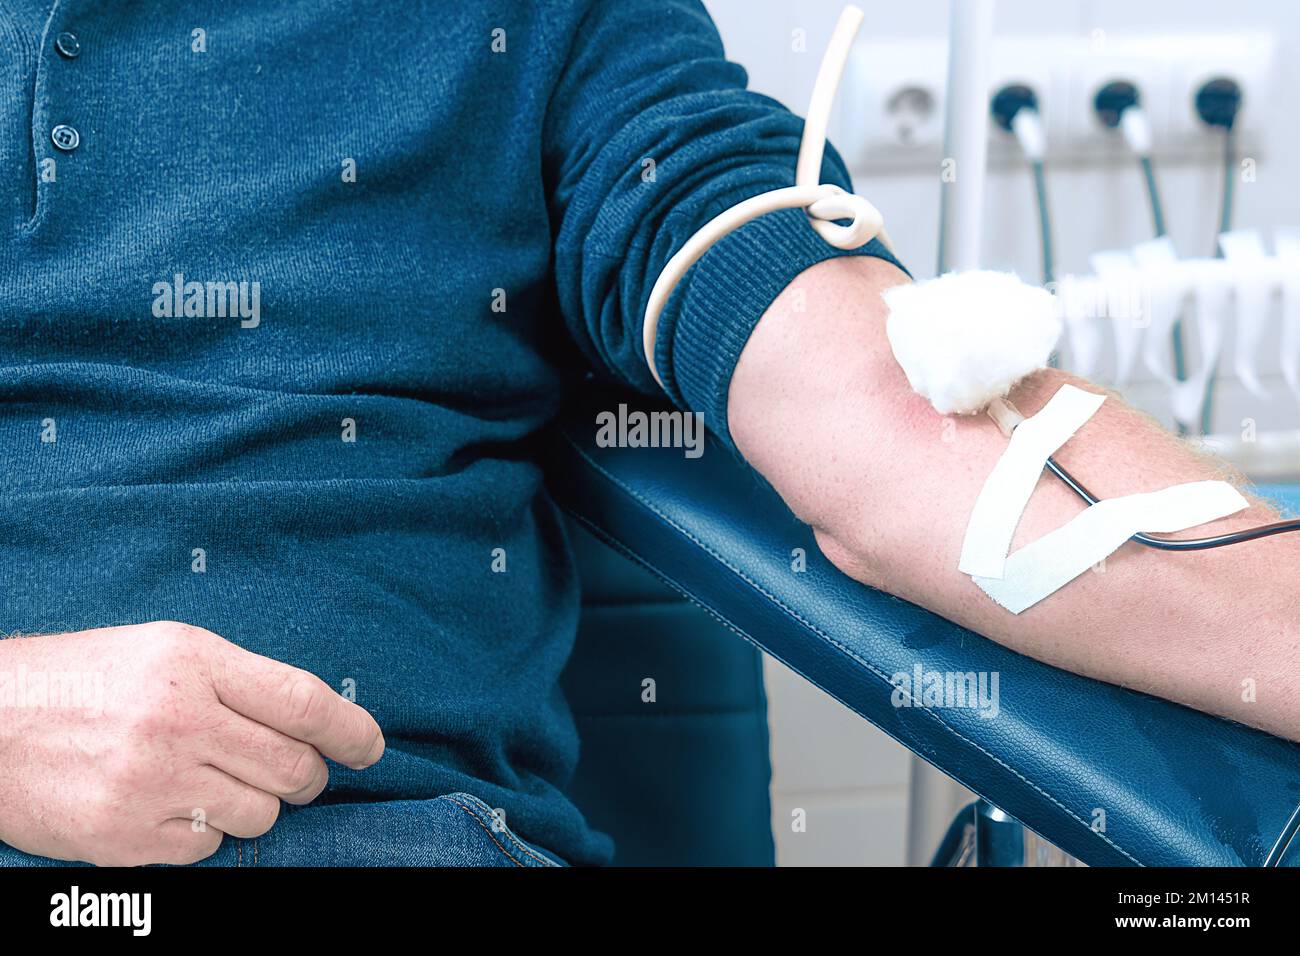 Topic of donation. Man donates blood in hospital. Person's hand with needle and IV. Close-up. Donor sits in chair. Background.. Stock Photo